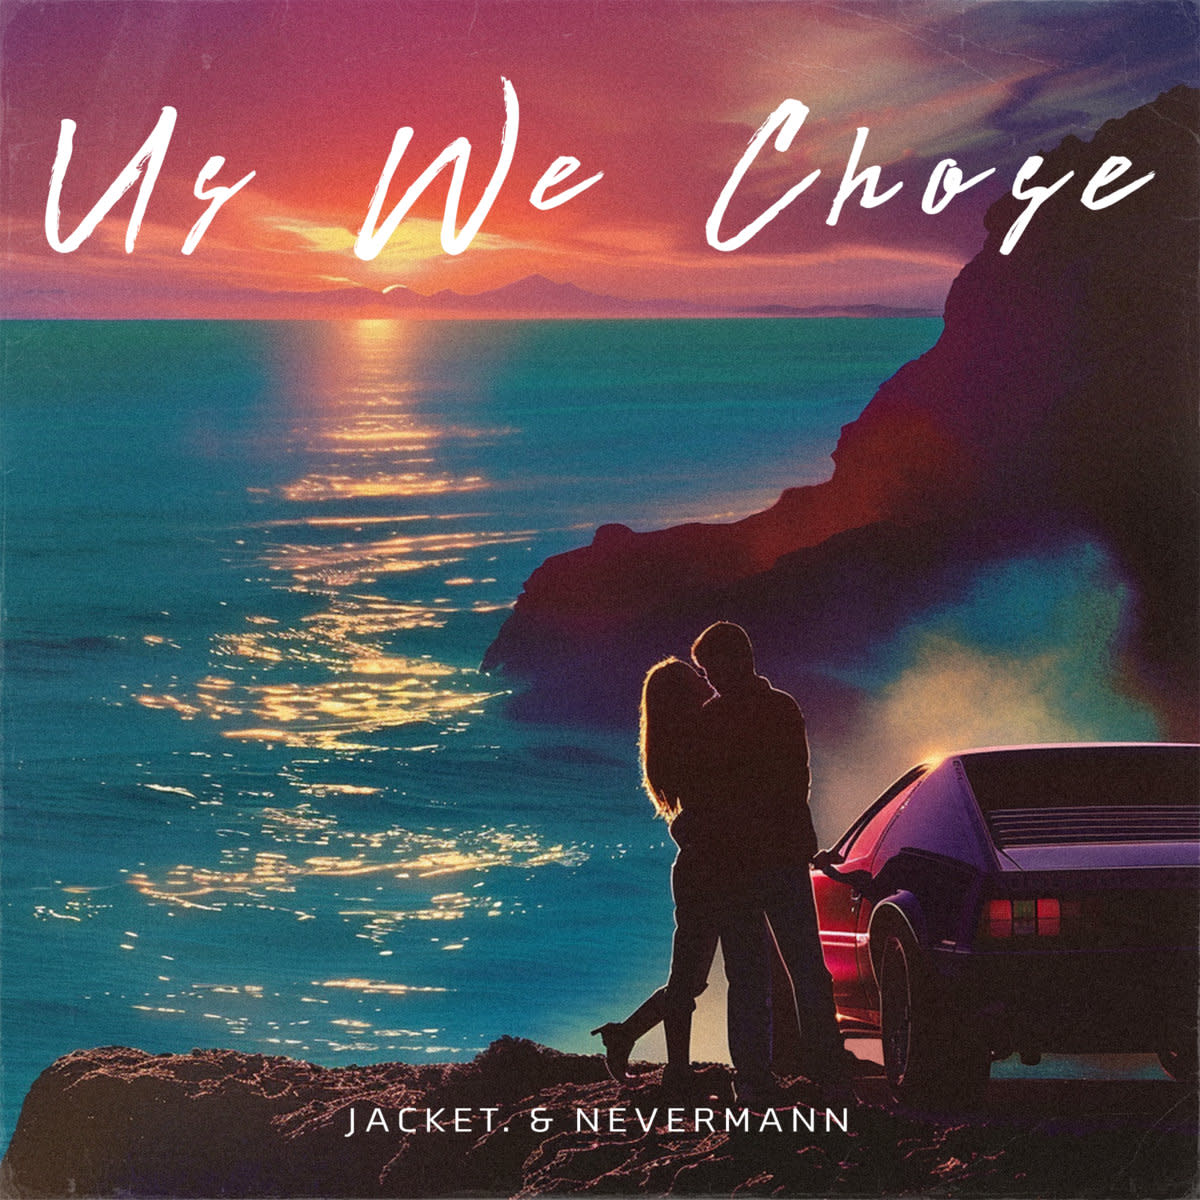 Synth Single Review: “Us We Chose’’ by jacket. & NeverMann